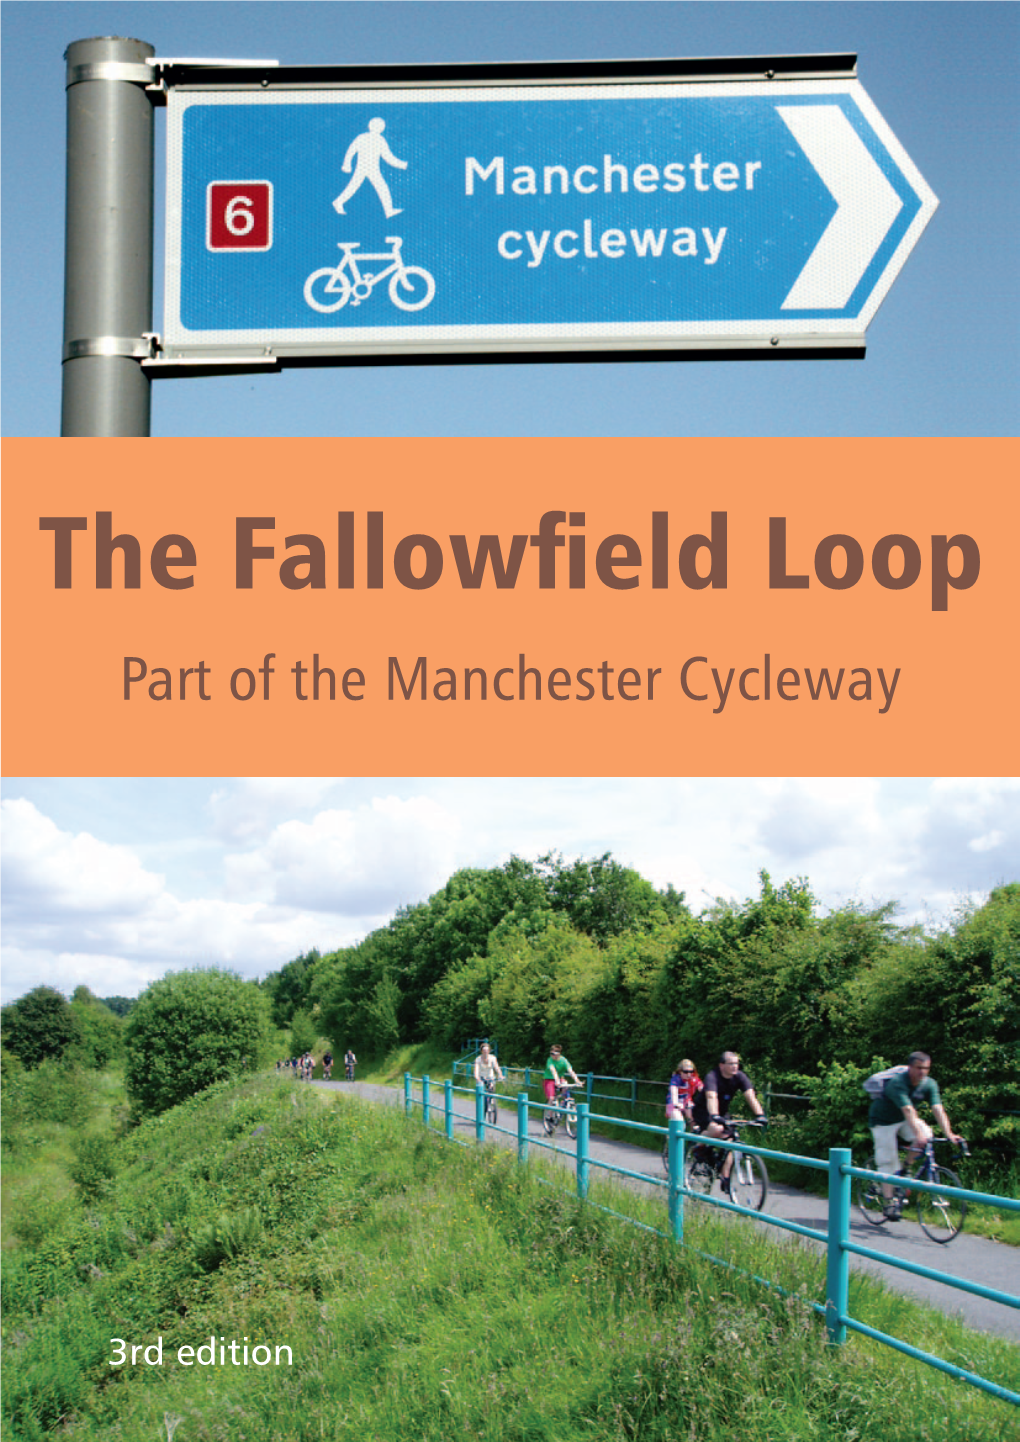 The Fallowfield Loop Part of the Manchester Cycleway